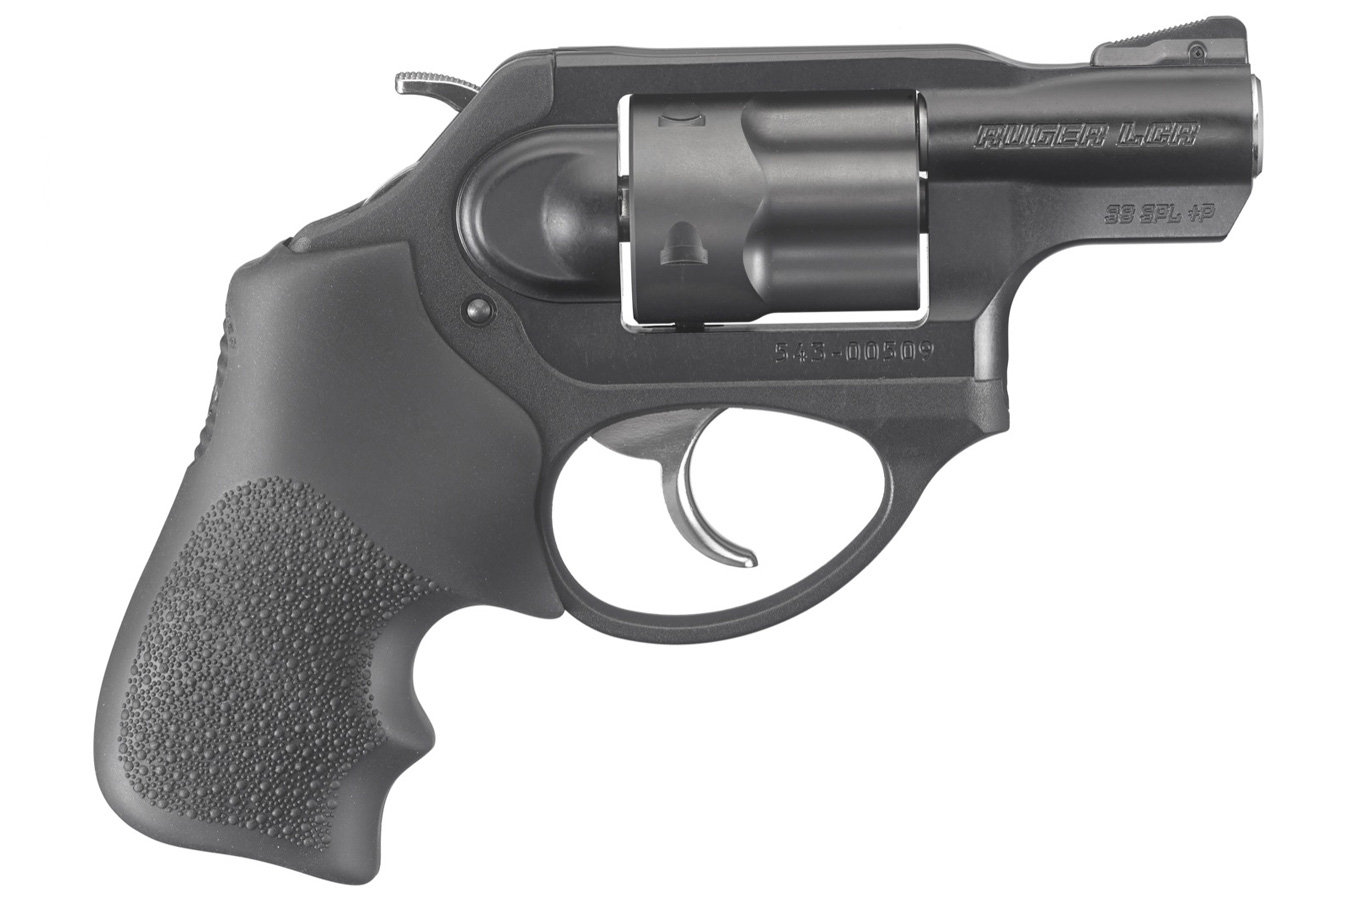 No. 18 Best Selling: RUGER LCR-X 38SPL DOUBLE ACTION REVOLVER